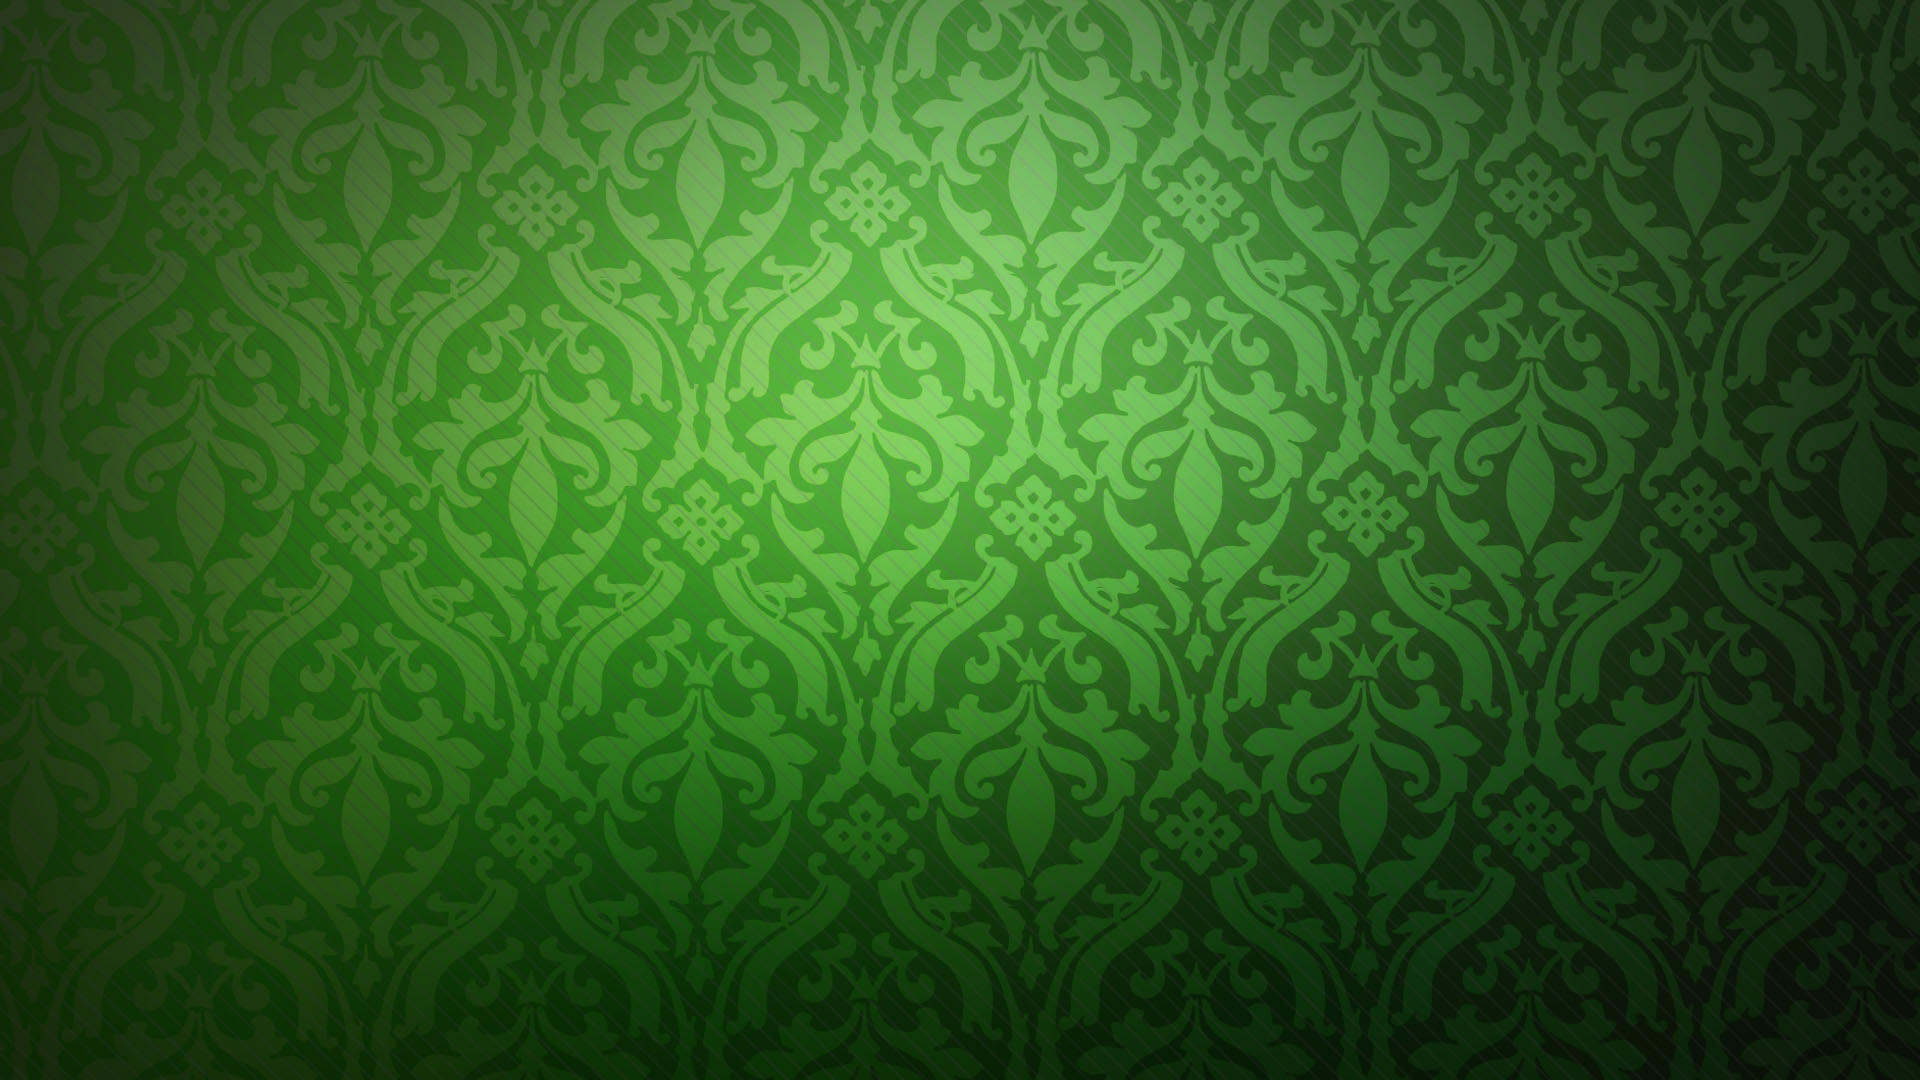 10+ High Res Beautiful Green Floral Wallpaper Patterns | Free ...